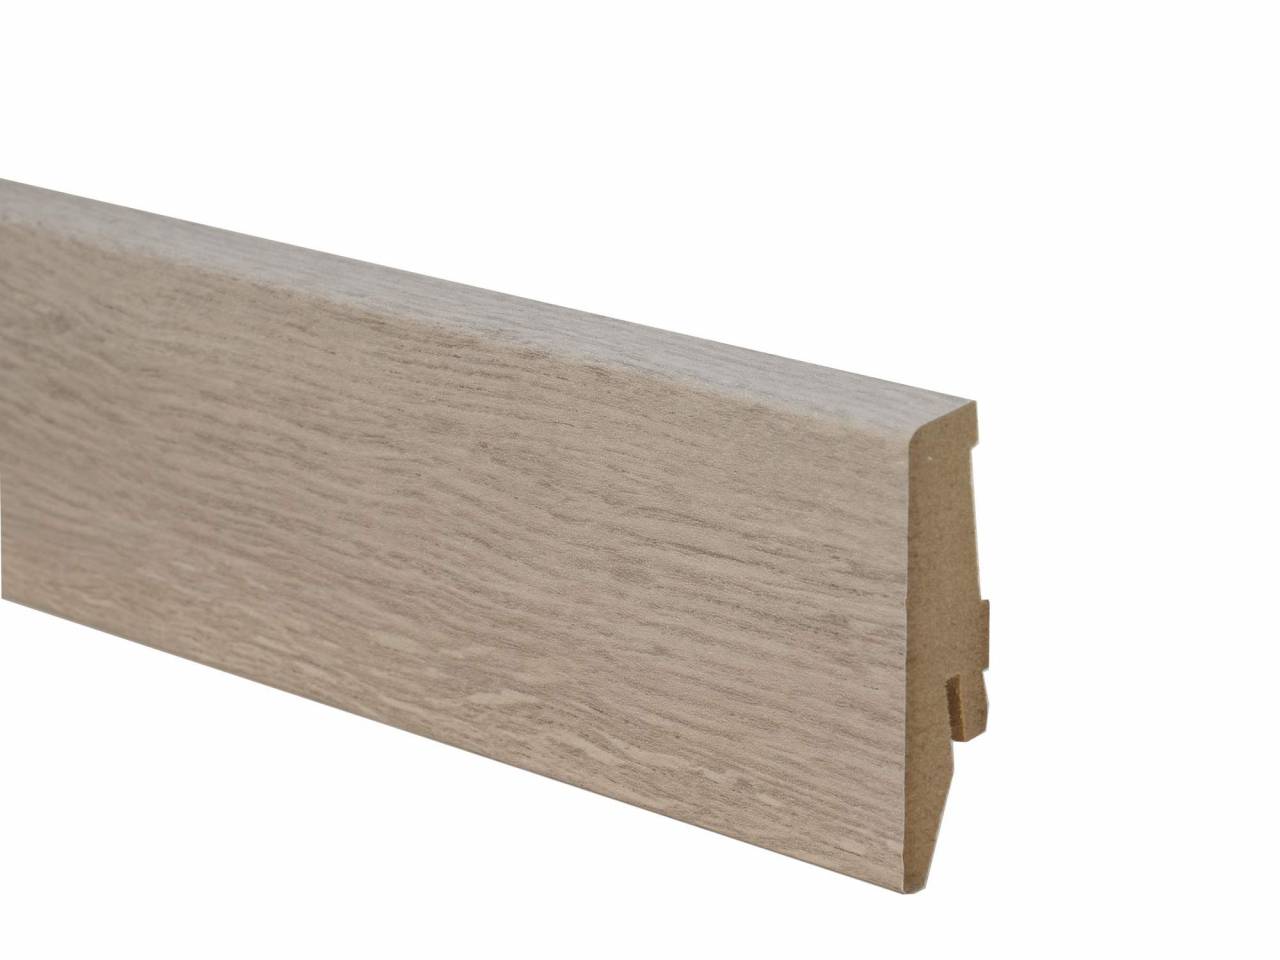 8461 MDF floor sill with cable channel and height 58 mm. Suitable for beige laminate flooring. Length 2.6 m.